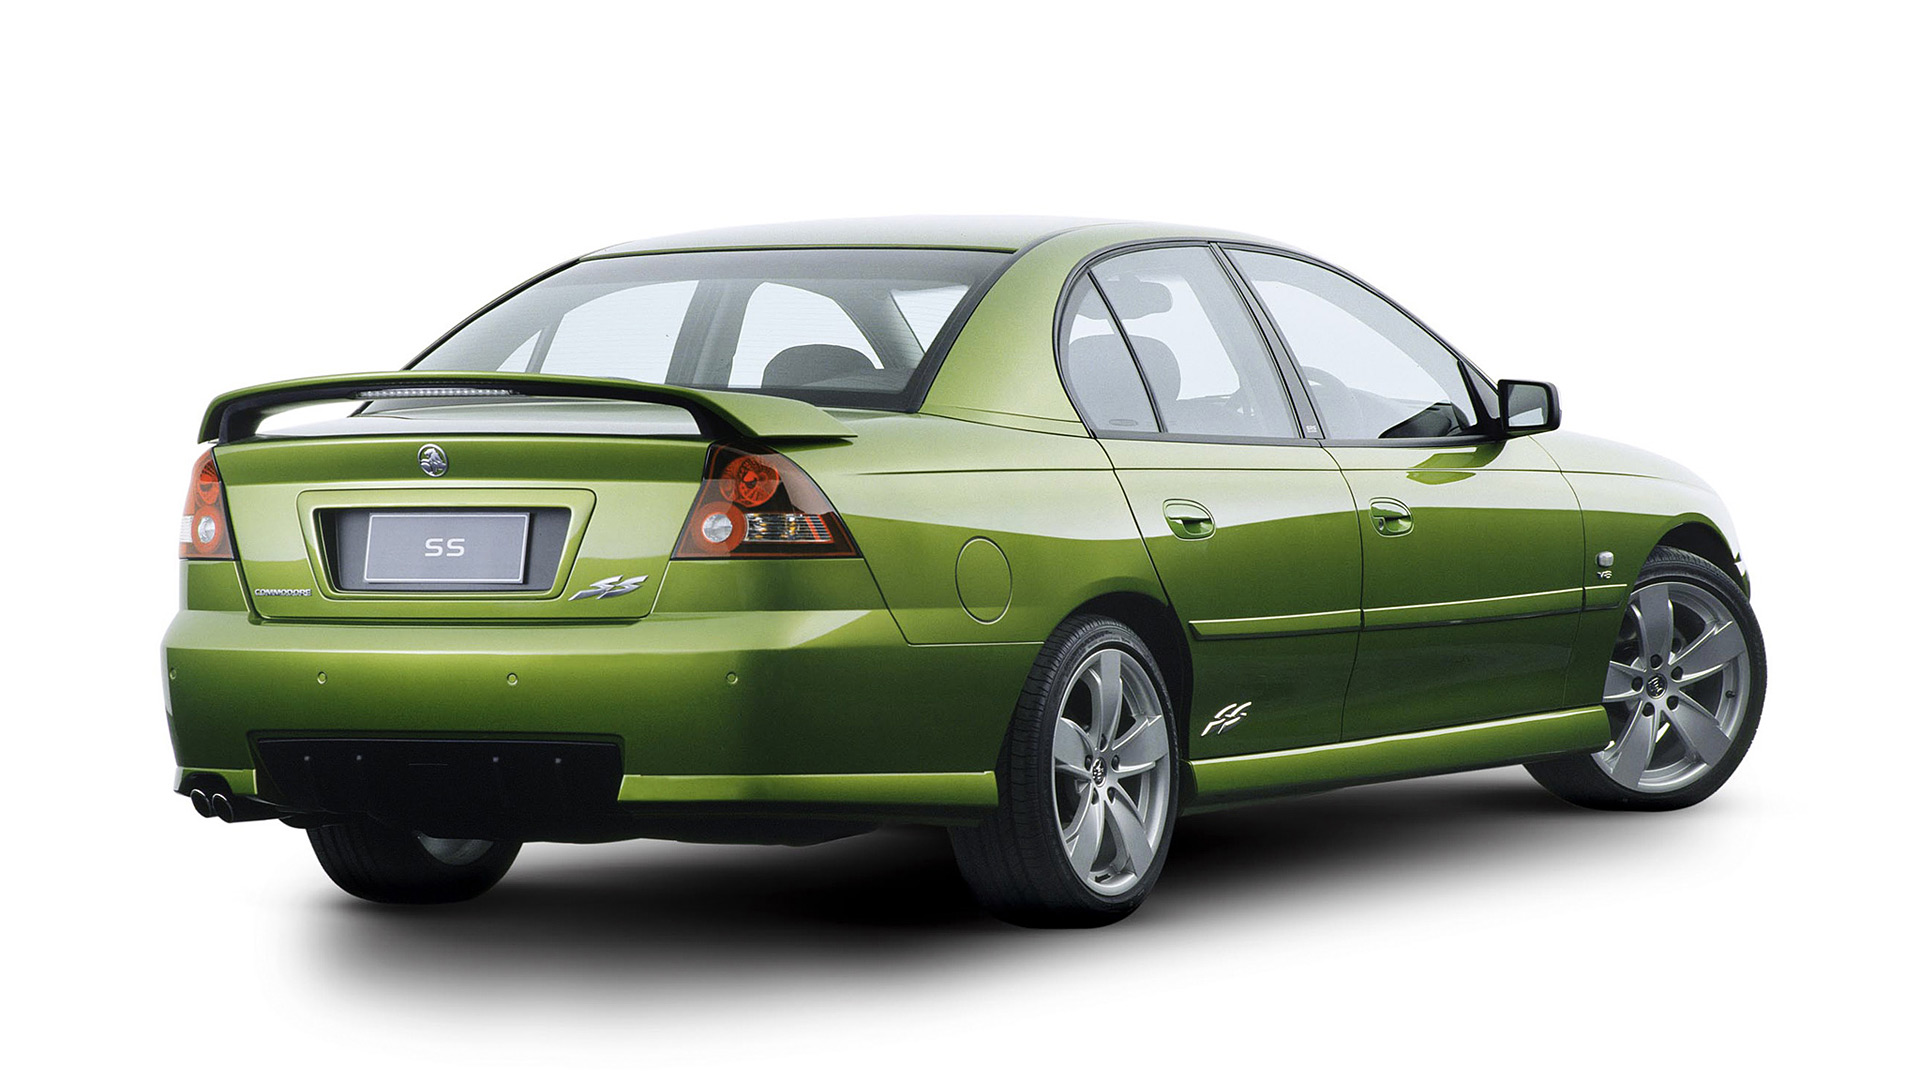  2002 Holden Commodore SS Wallpaper.